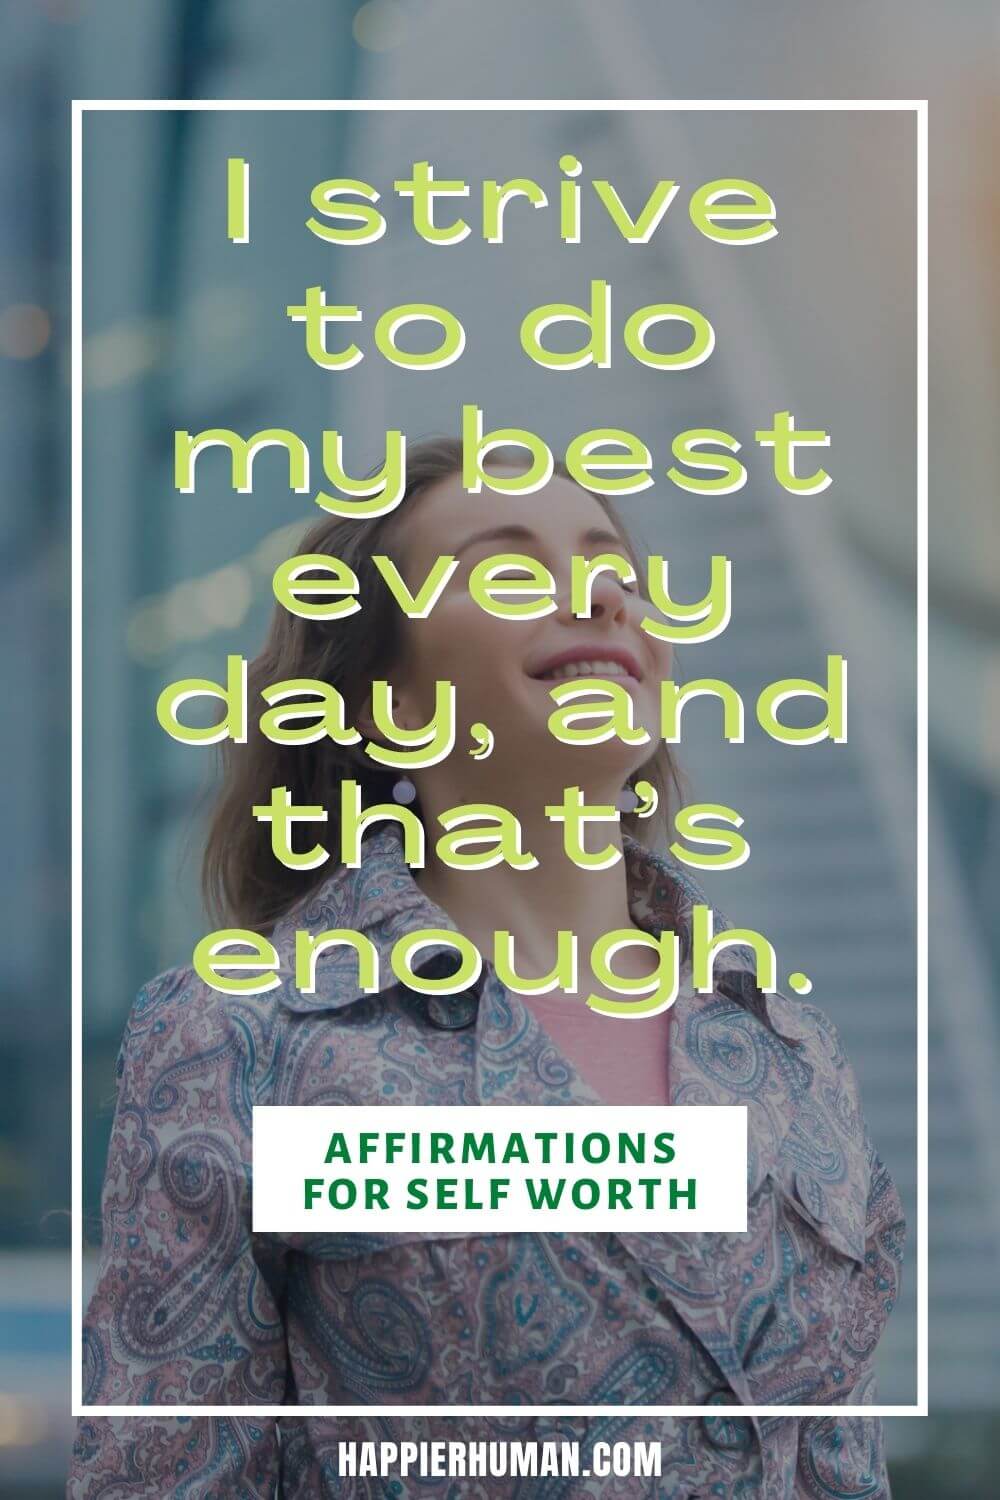 Affirmations for Self Worth - I strive to do my best every day, and that’s enough. | affirmations for confidence and health | 100 affirmations for confidence | 10 positive affirmations to boost confidence